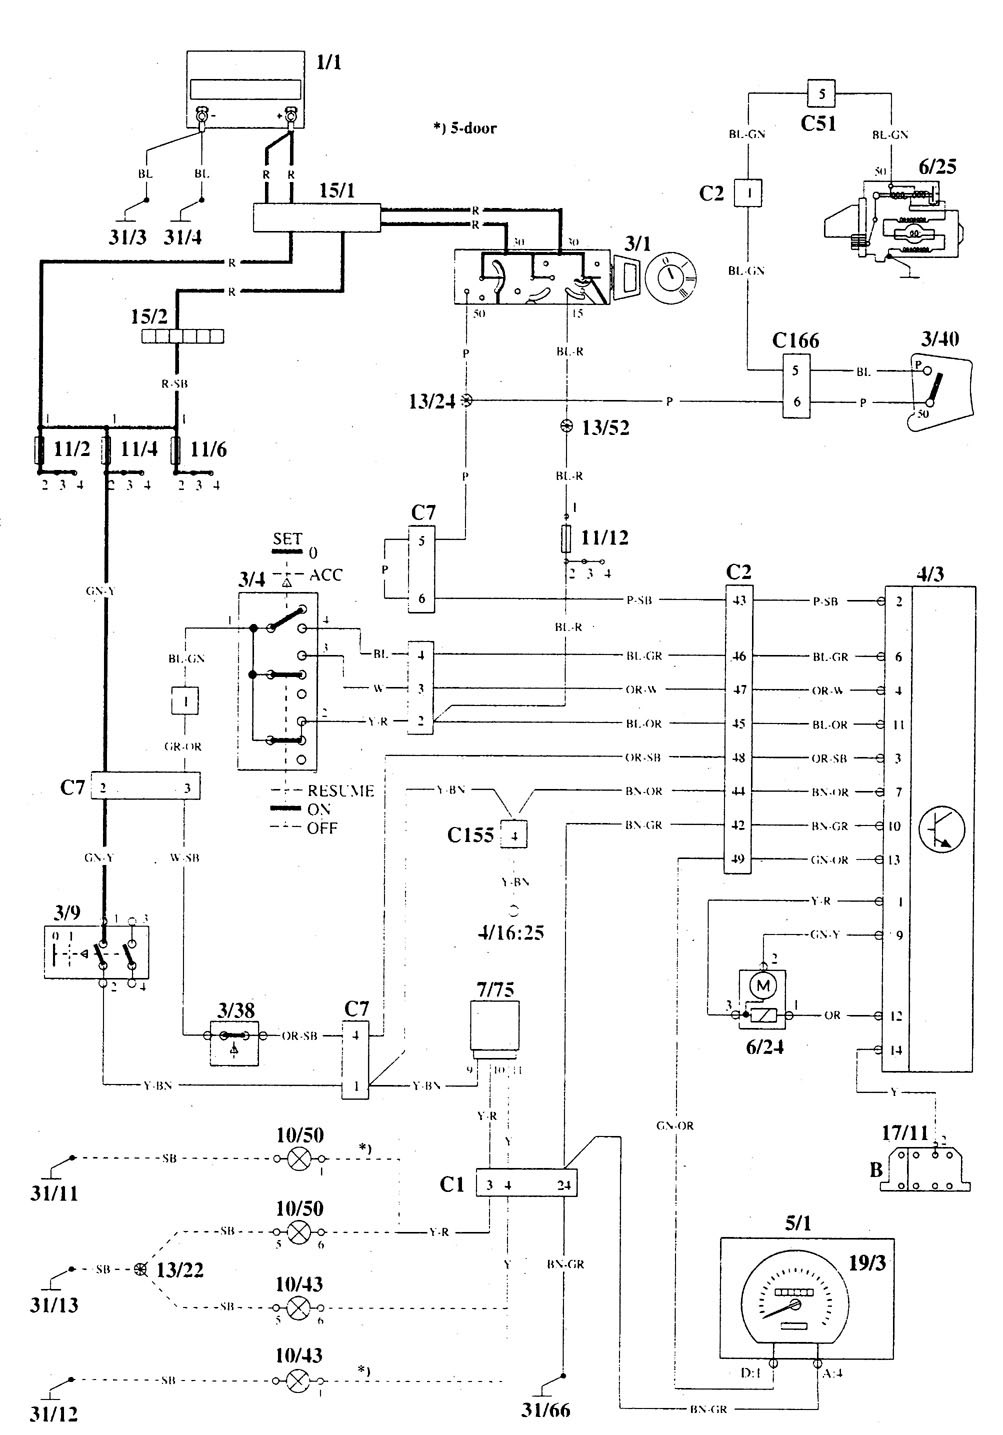 1996 Volvo 850 Radio Wiring Diagram from www.carknowledge.info